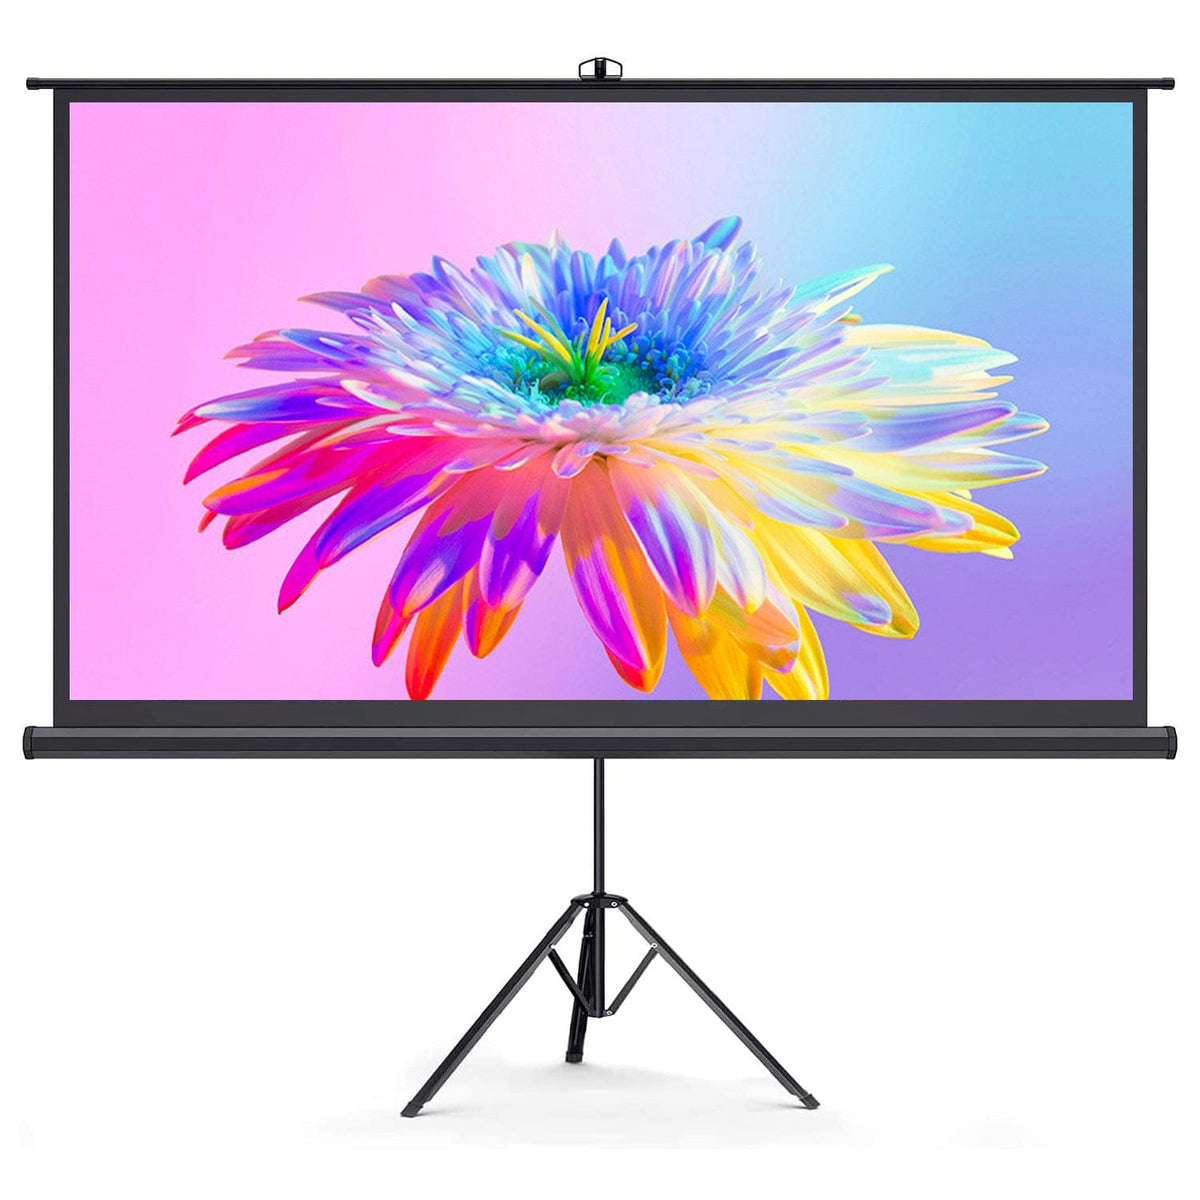 BOMAKER 100&quot; Projector Screen with Stand, 16:9, 1.2 Gain, 3D, 4K UHD, HDR Ready. - Bomaker